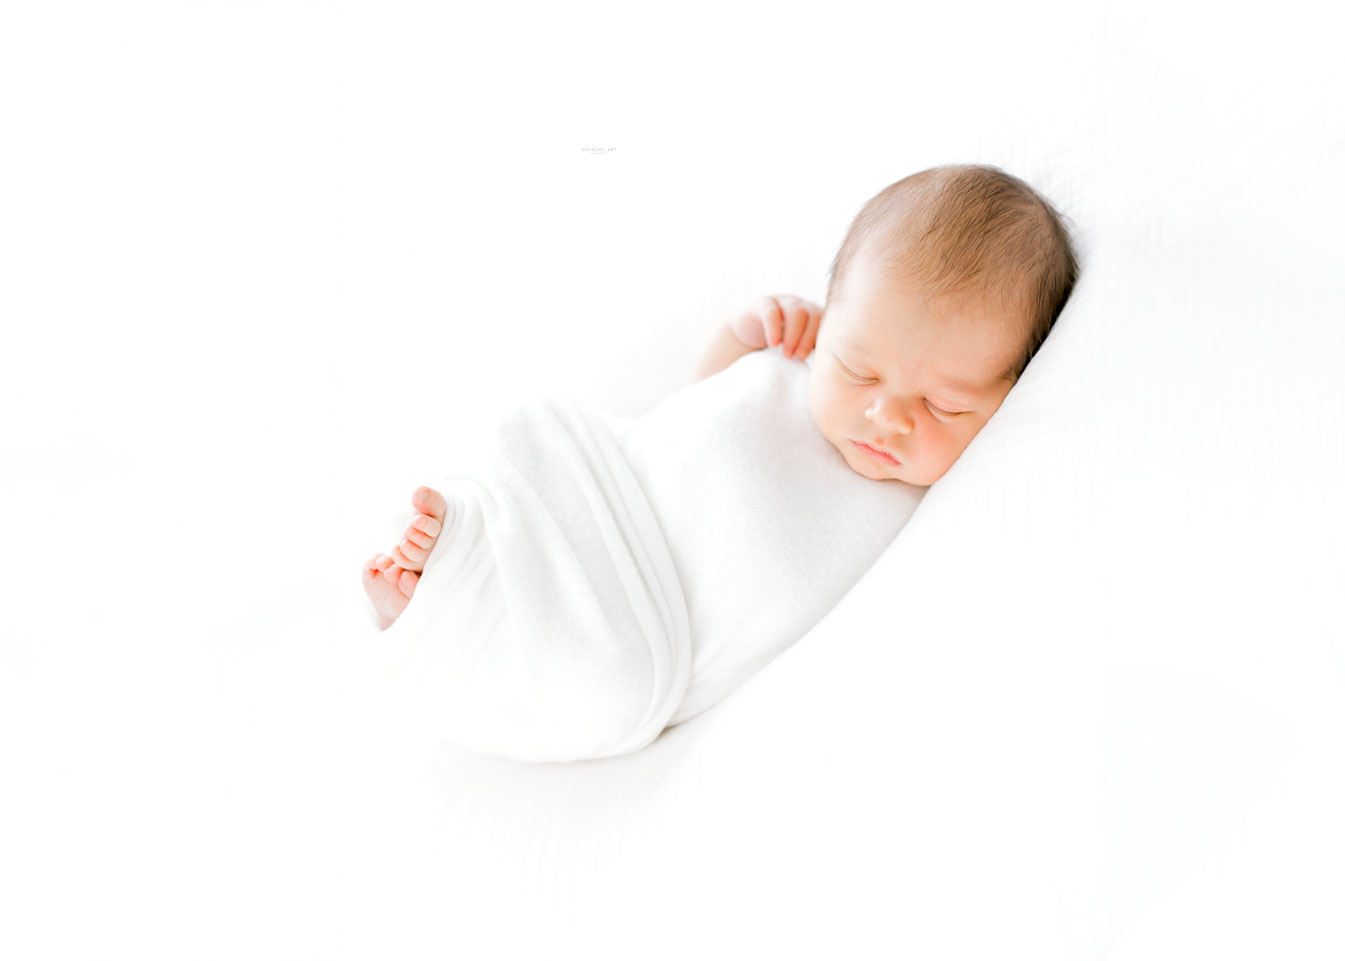 Welcoming Baby Liam and Family | Newborn Session | Whimsee Art Photography